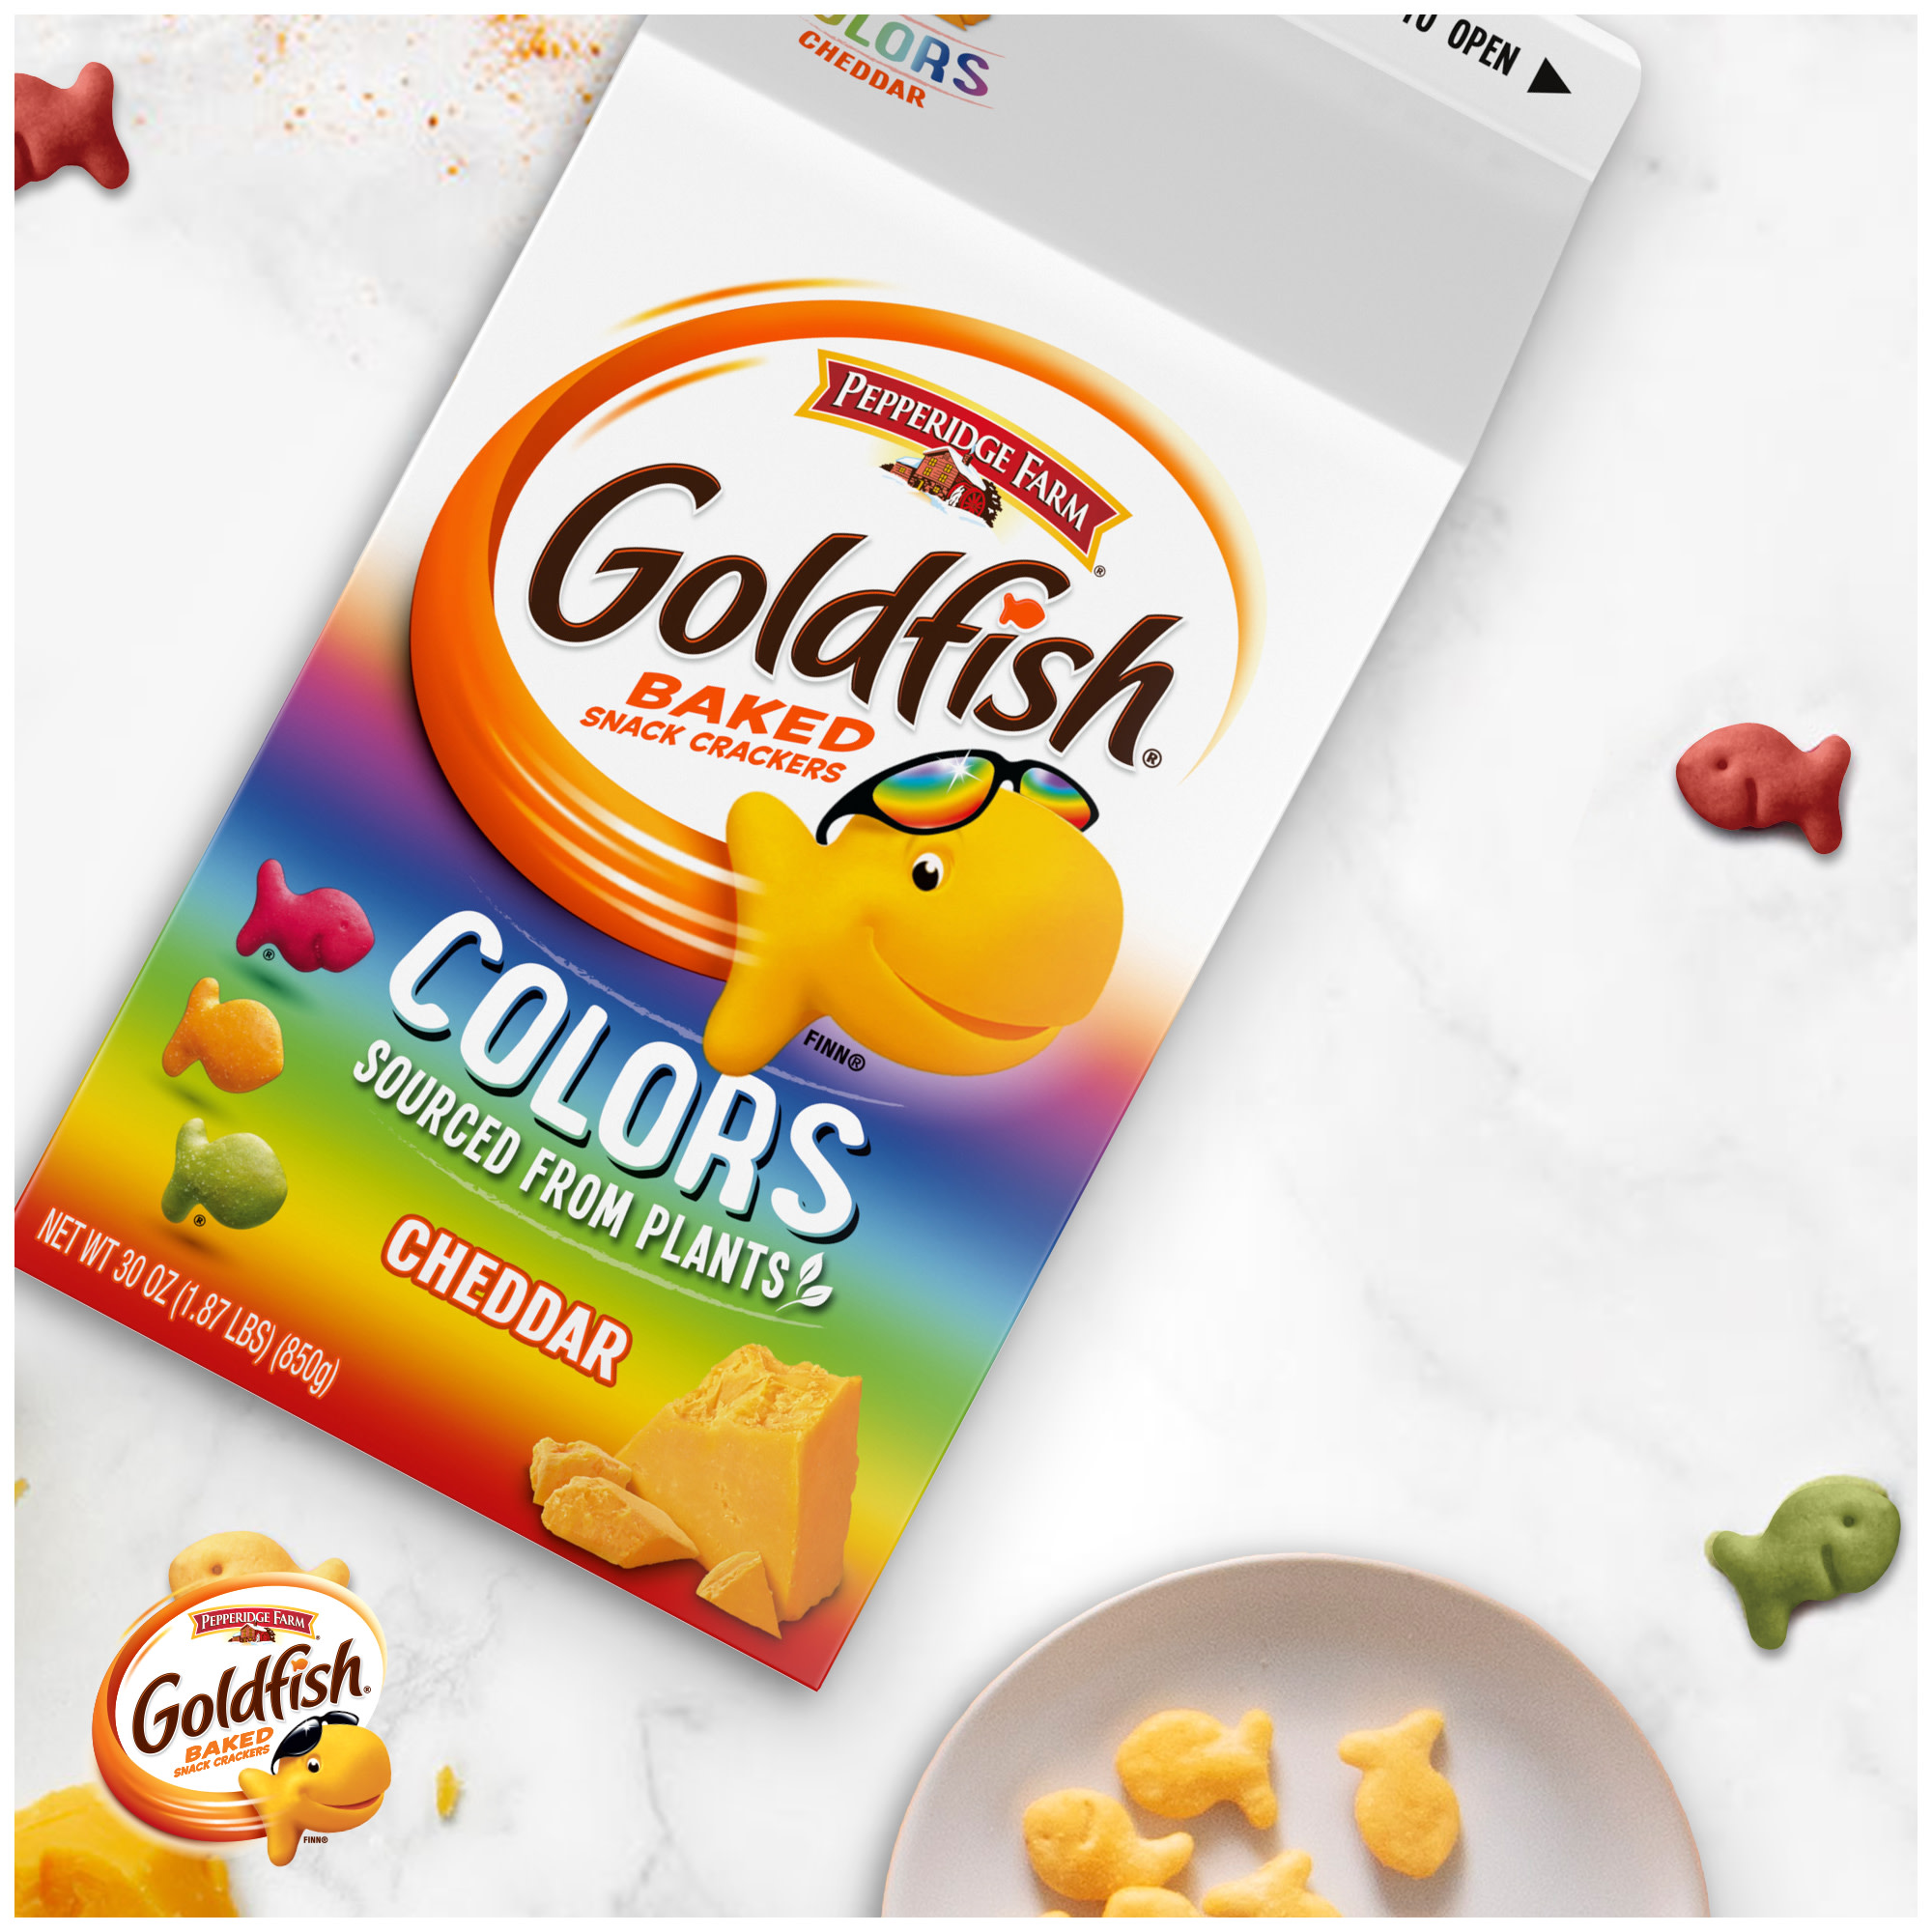 Goldfish Colors Cheddar Cheese Crackers, Baked Snack Crackers, 30 oz Carton - image 4 of 11